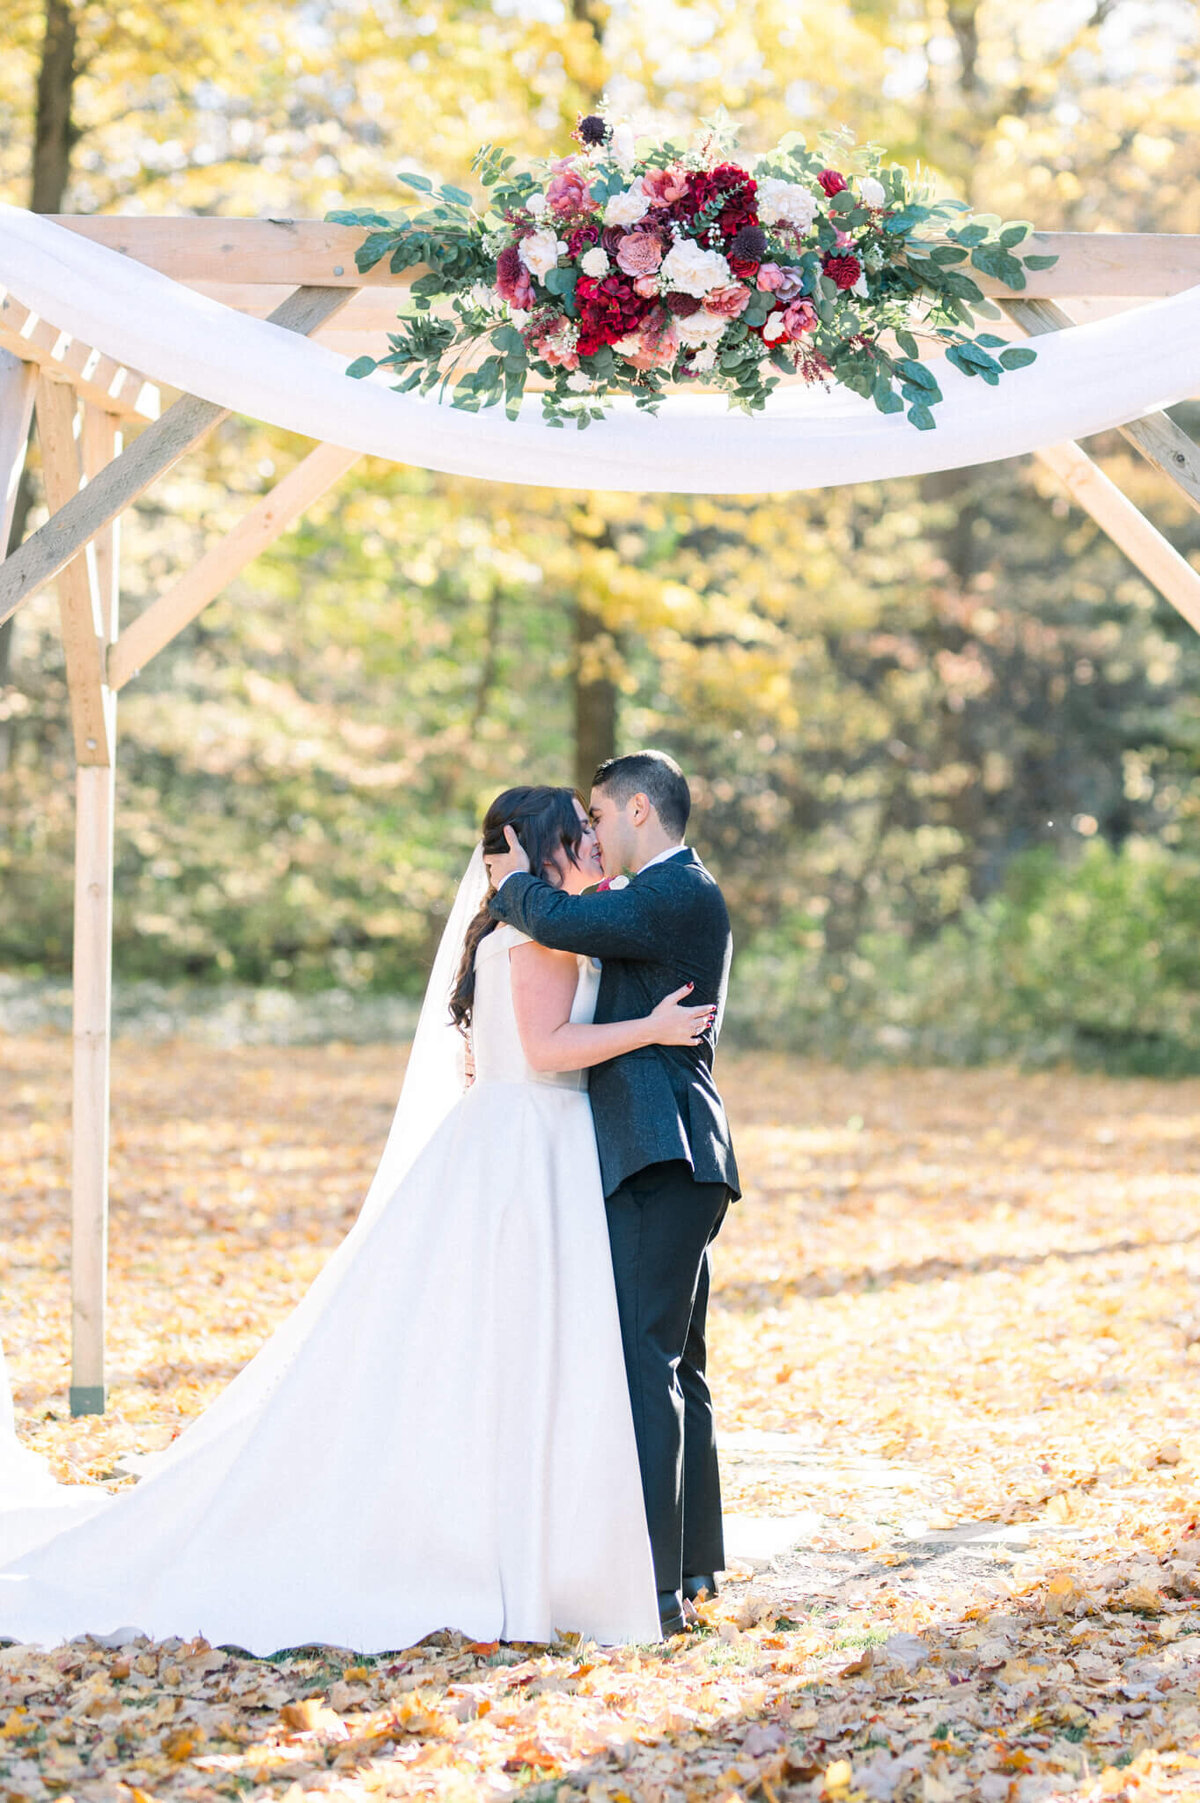 Bride and grooms first kiss under the arches at their Balls Fall's wedding. Captured by Niagara wedding photographer Kristine Marie Photography